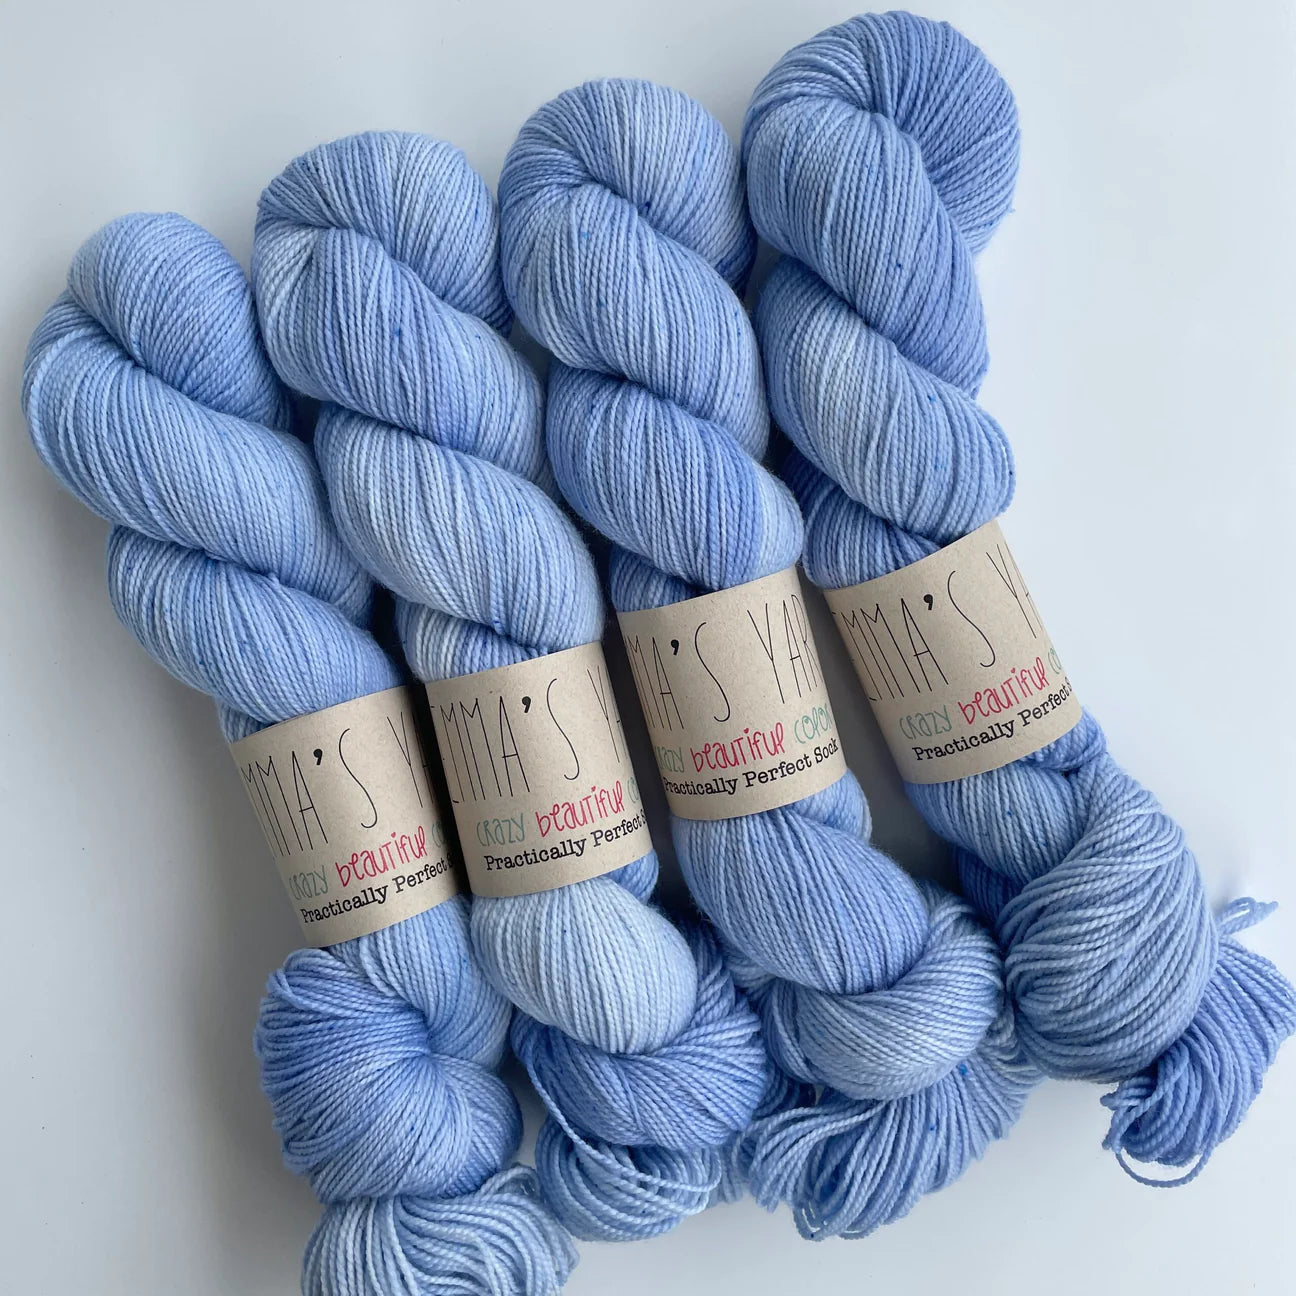 Emmas yarn; Practically perfect Sock; Forget Me Not